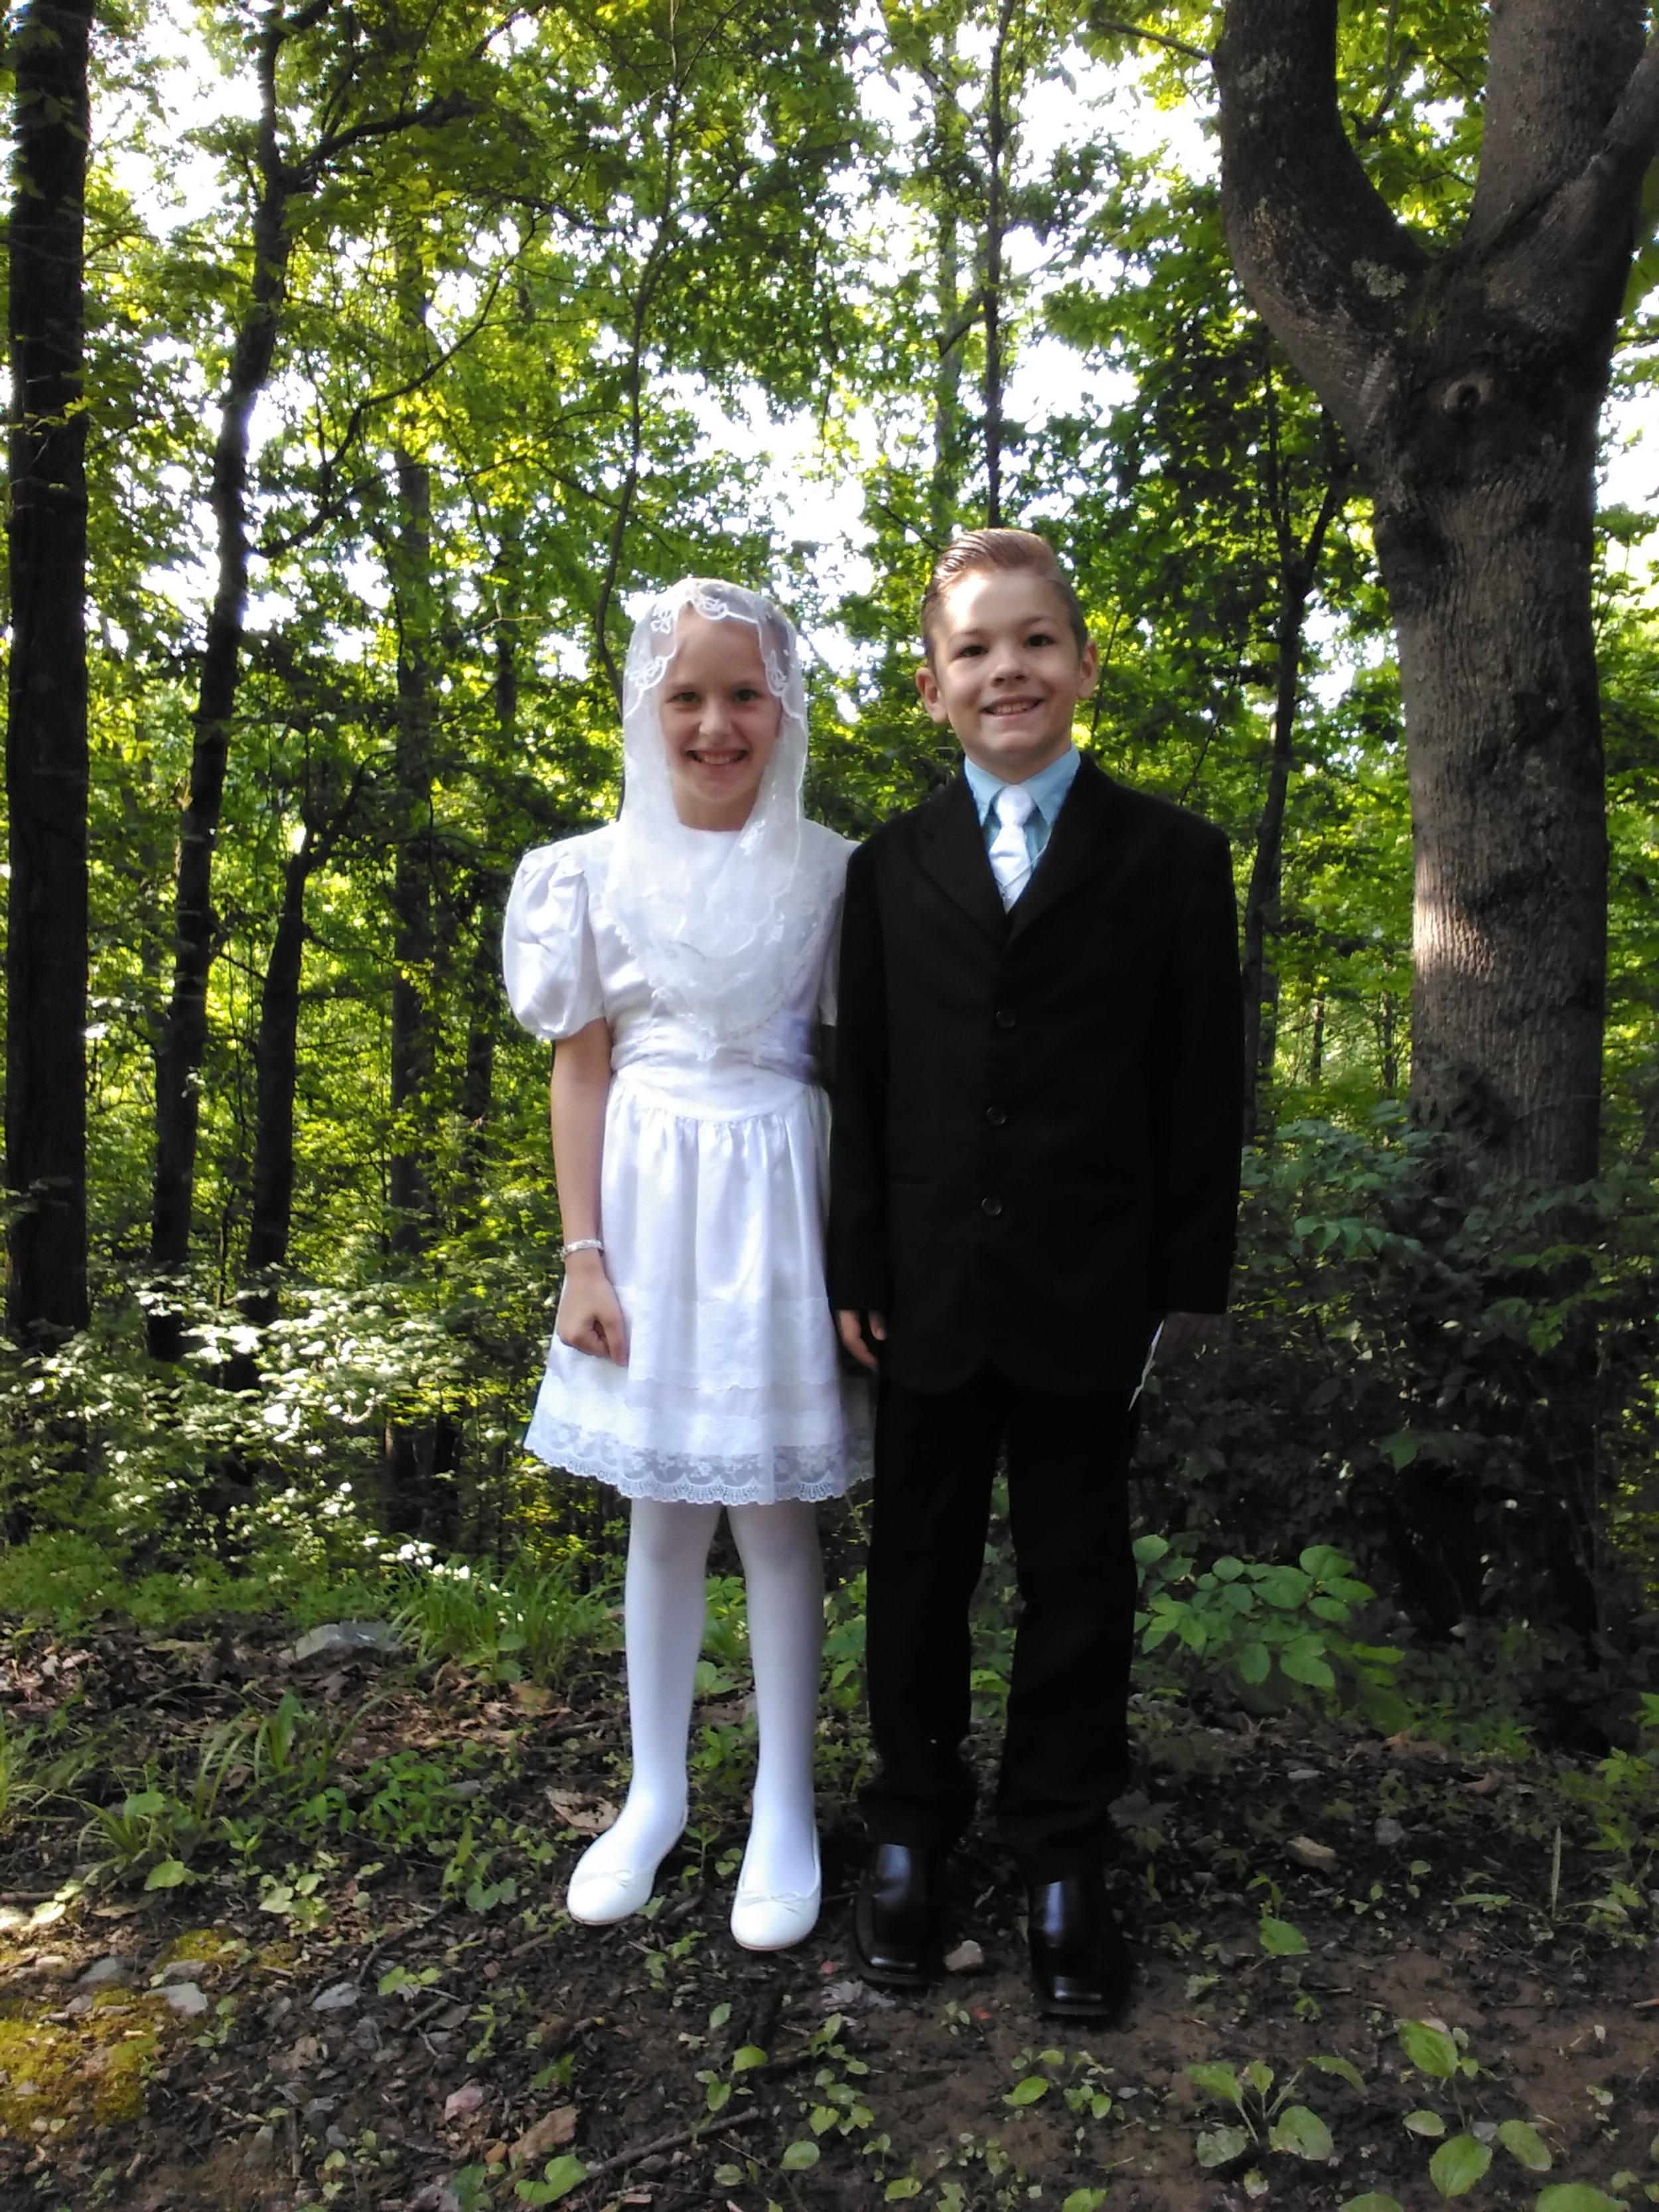 Congratulations! The twins received "First Communion"